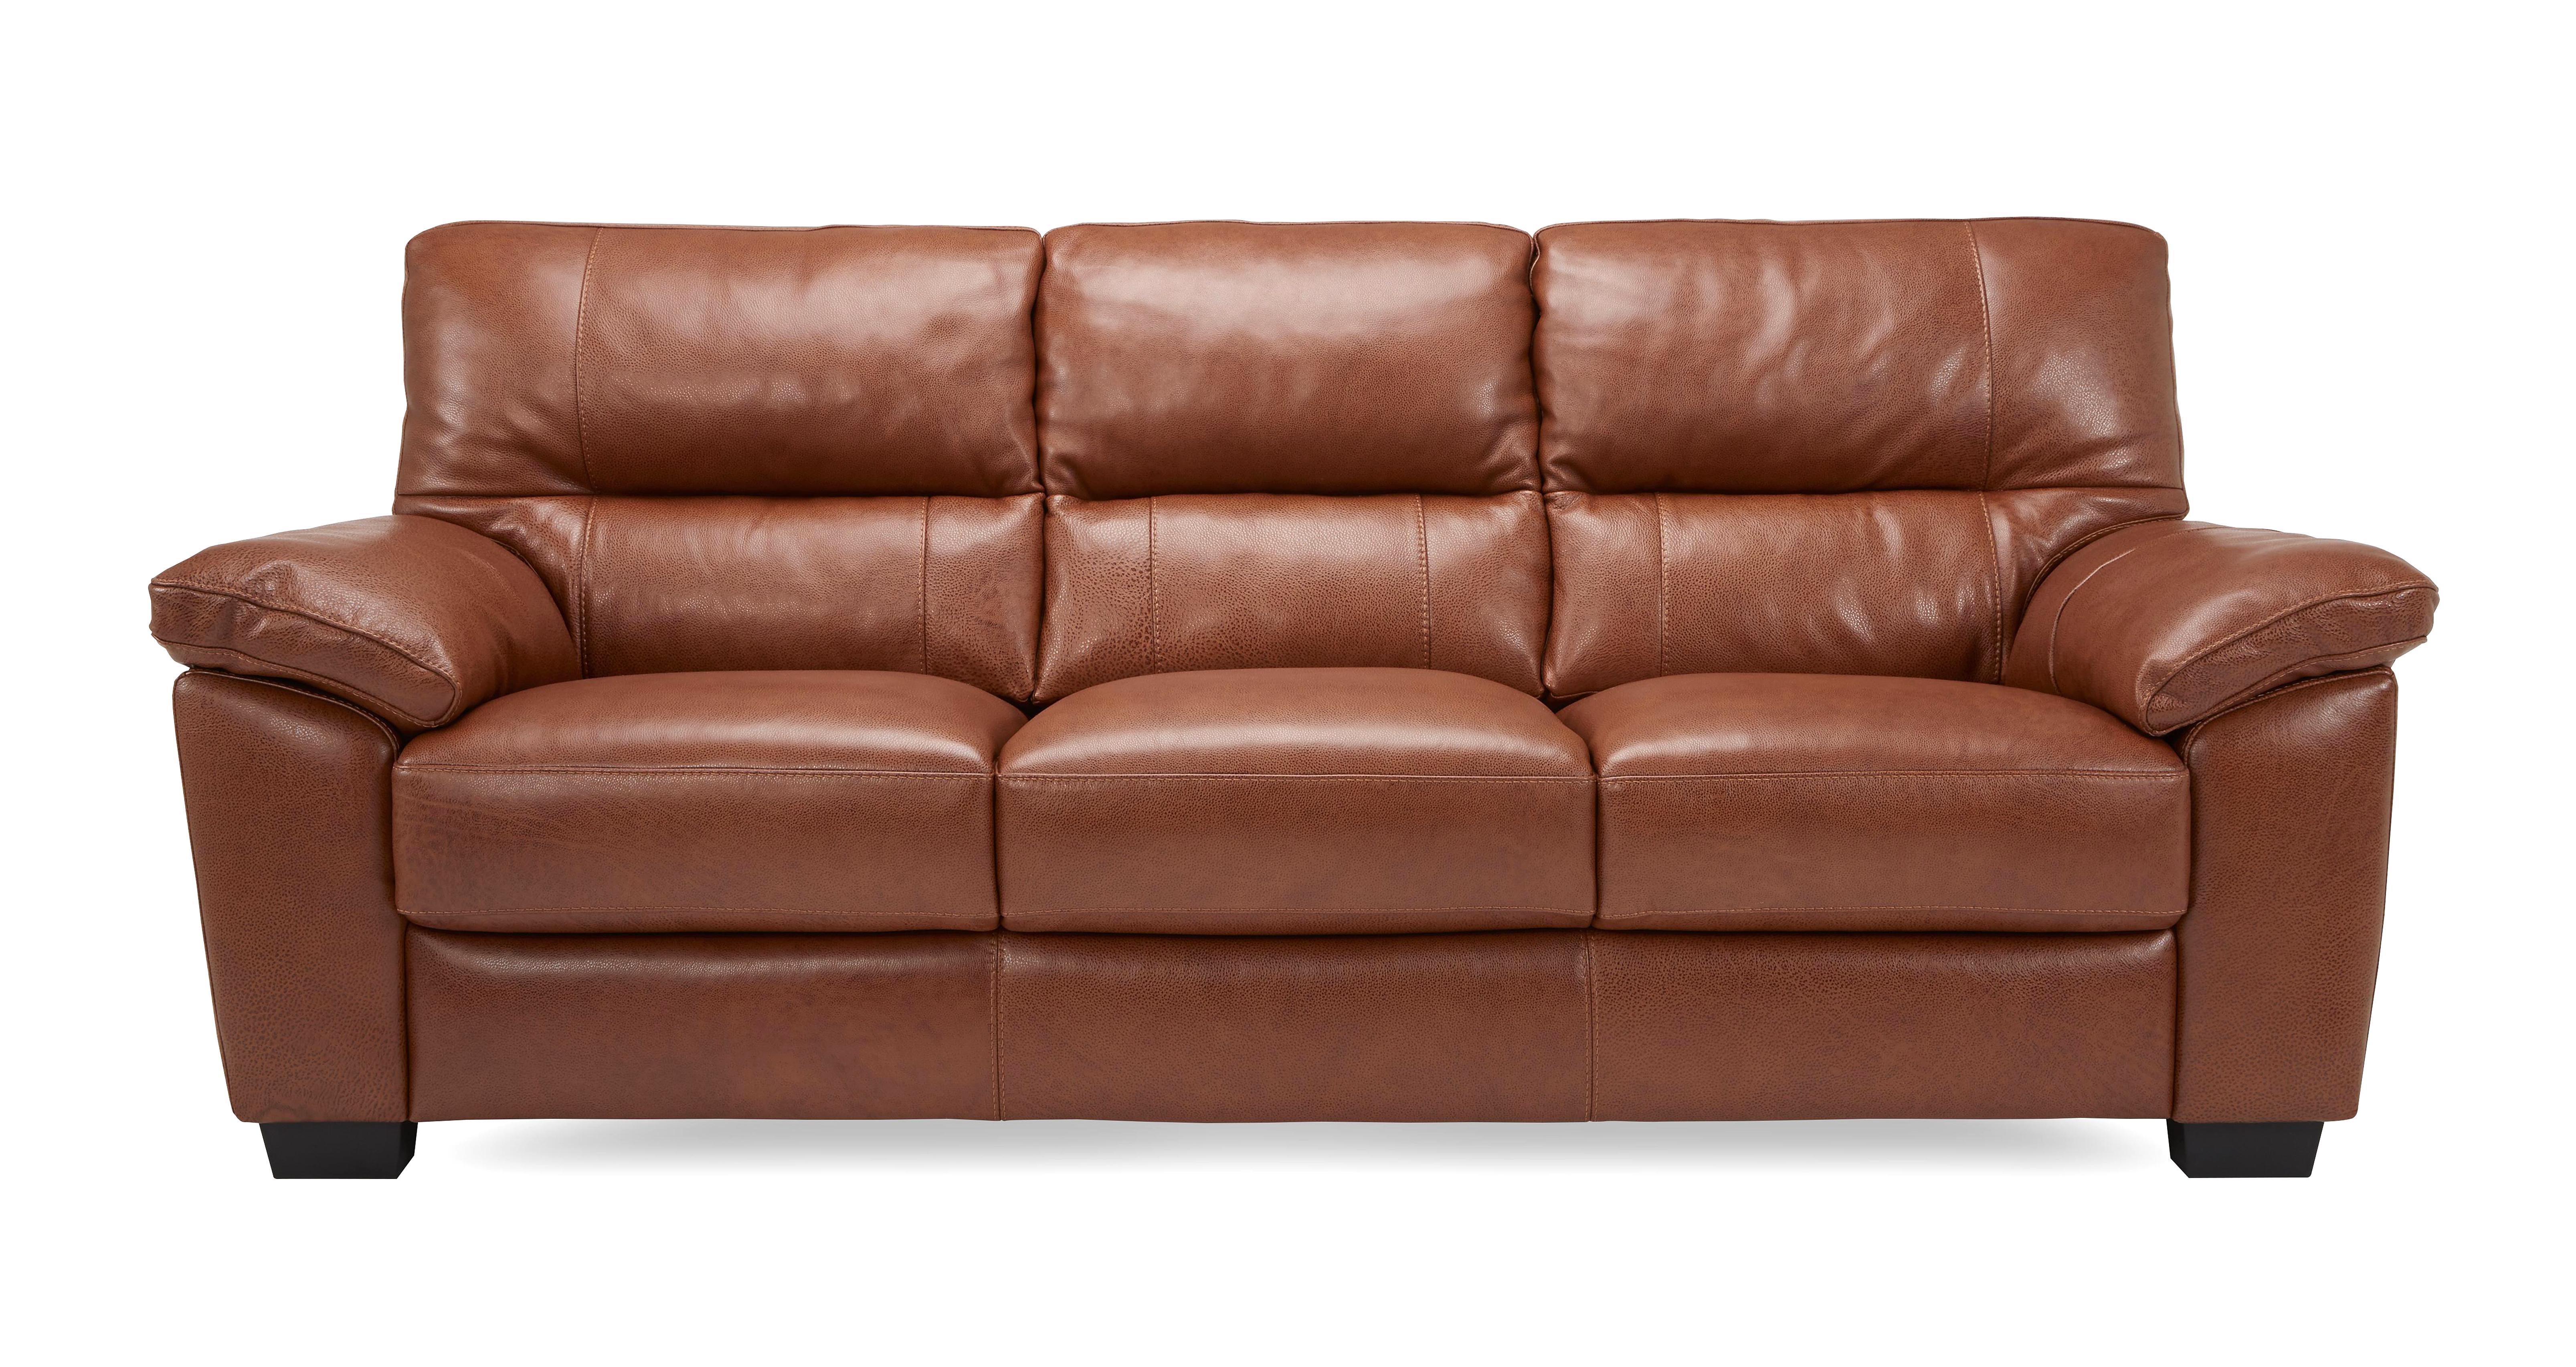 leather sofa for sale in chennai